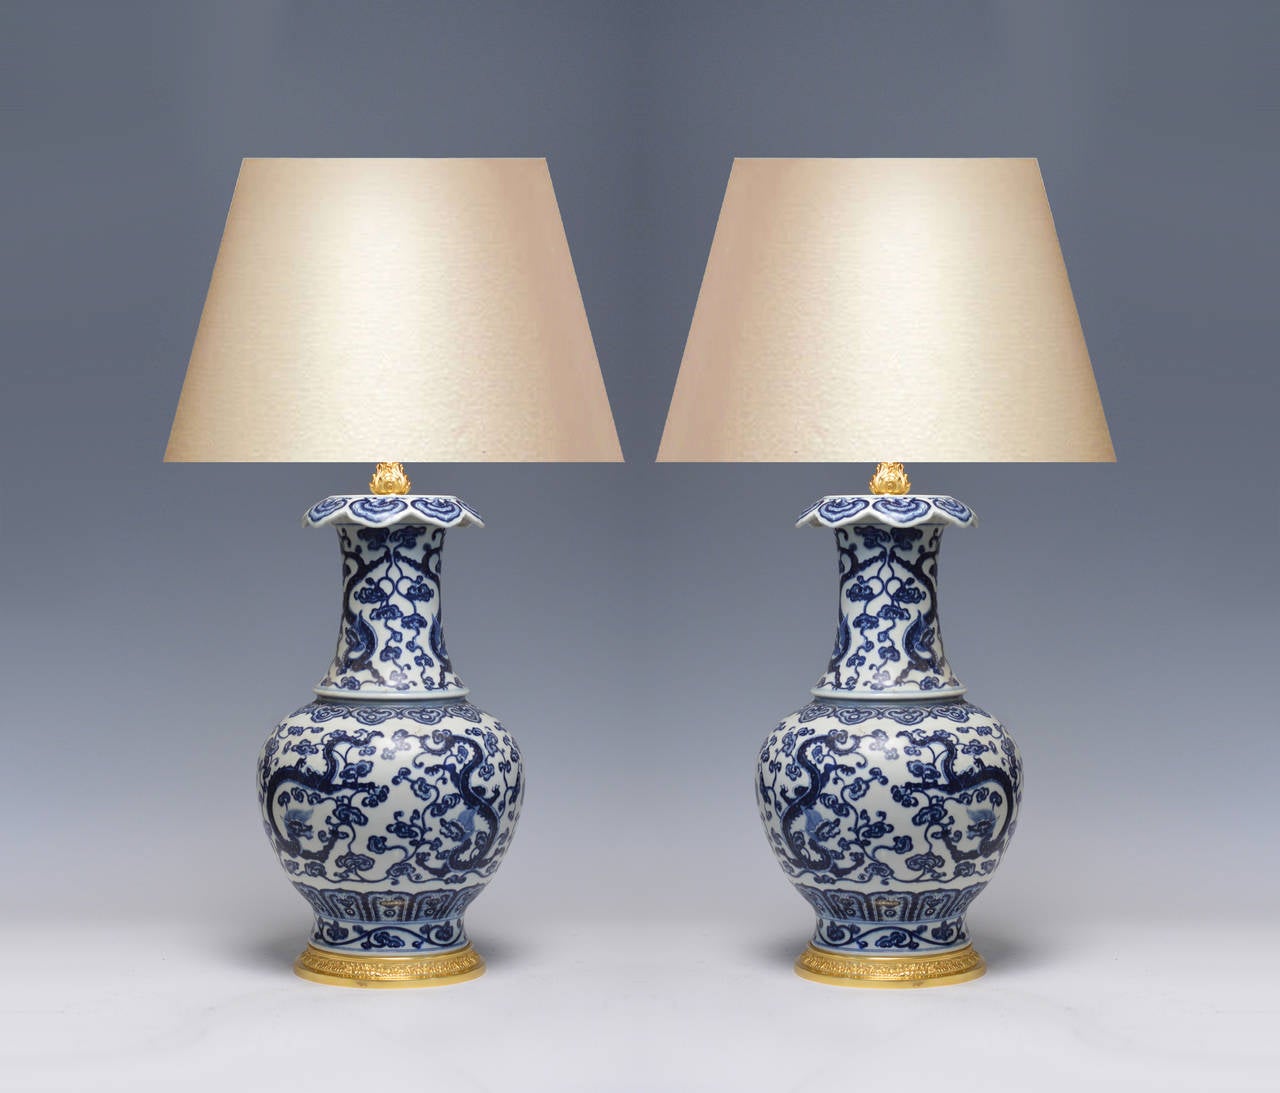 Pair of fine painted blue and white porcelain lamps with dragon and floral scroll decoration, gilt brass bases. Measure: 18